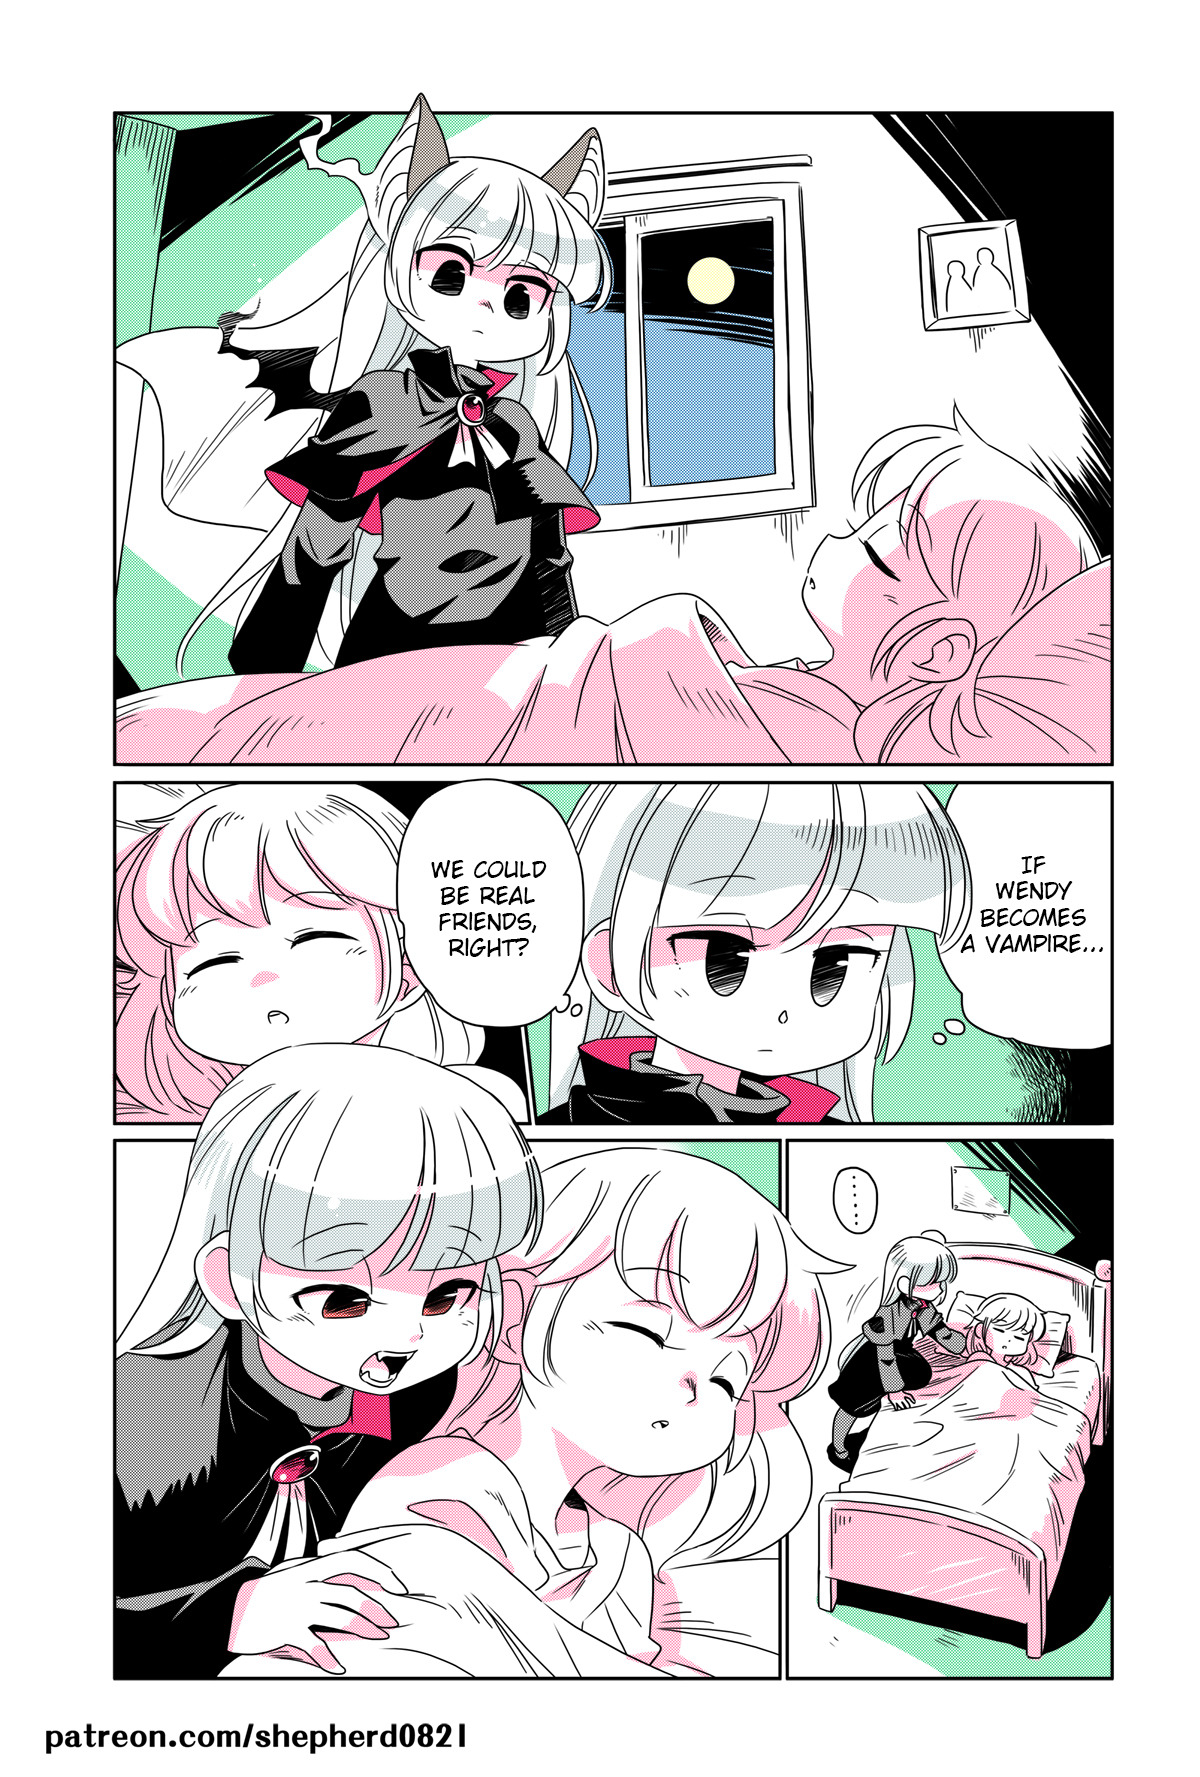   Modern MoGal # 053 - Carmilla&rsquo;s problem 2      Continuing from  #052